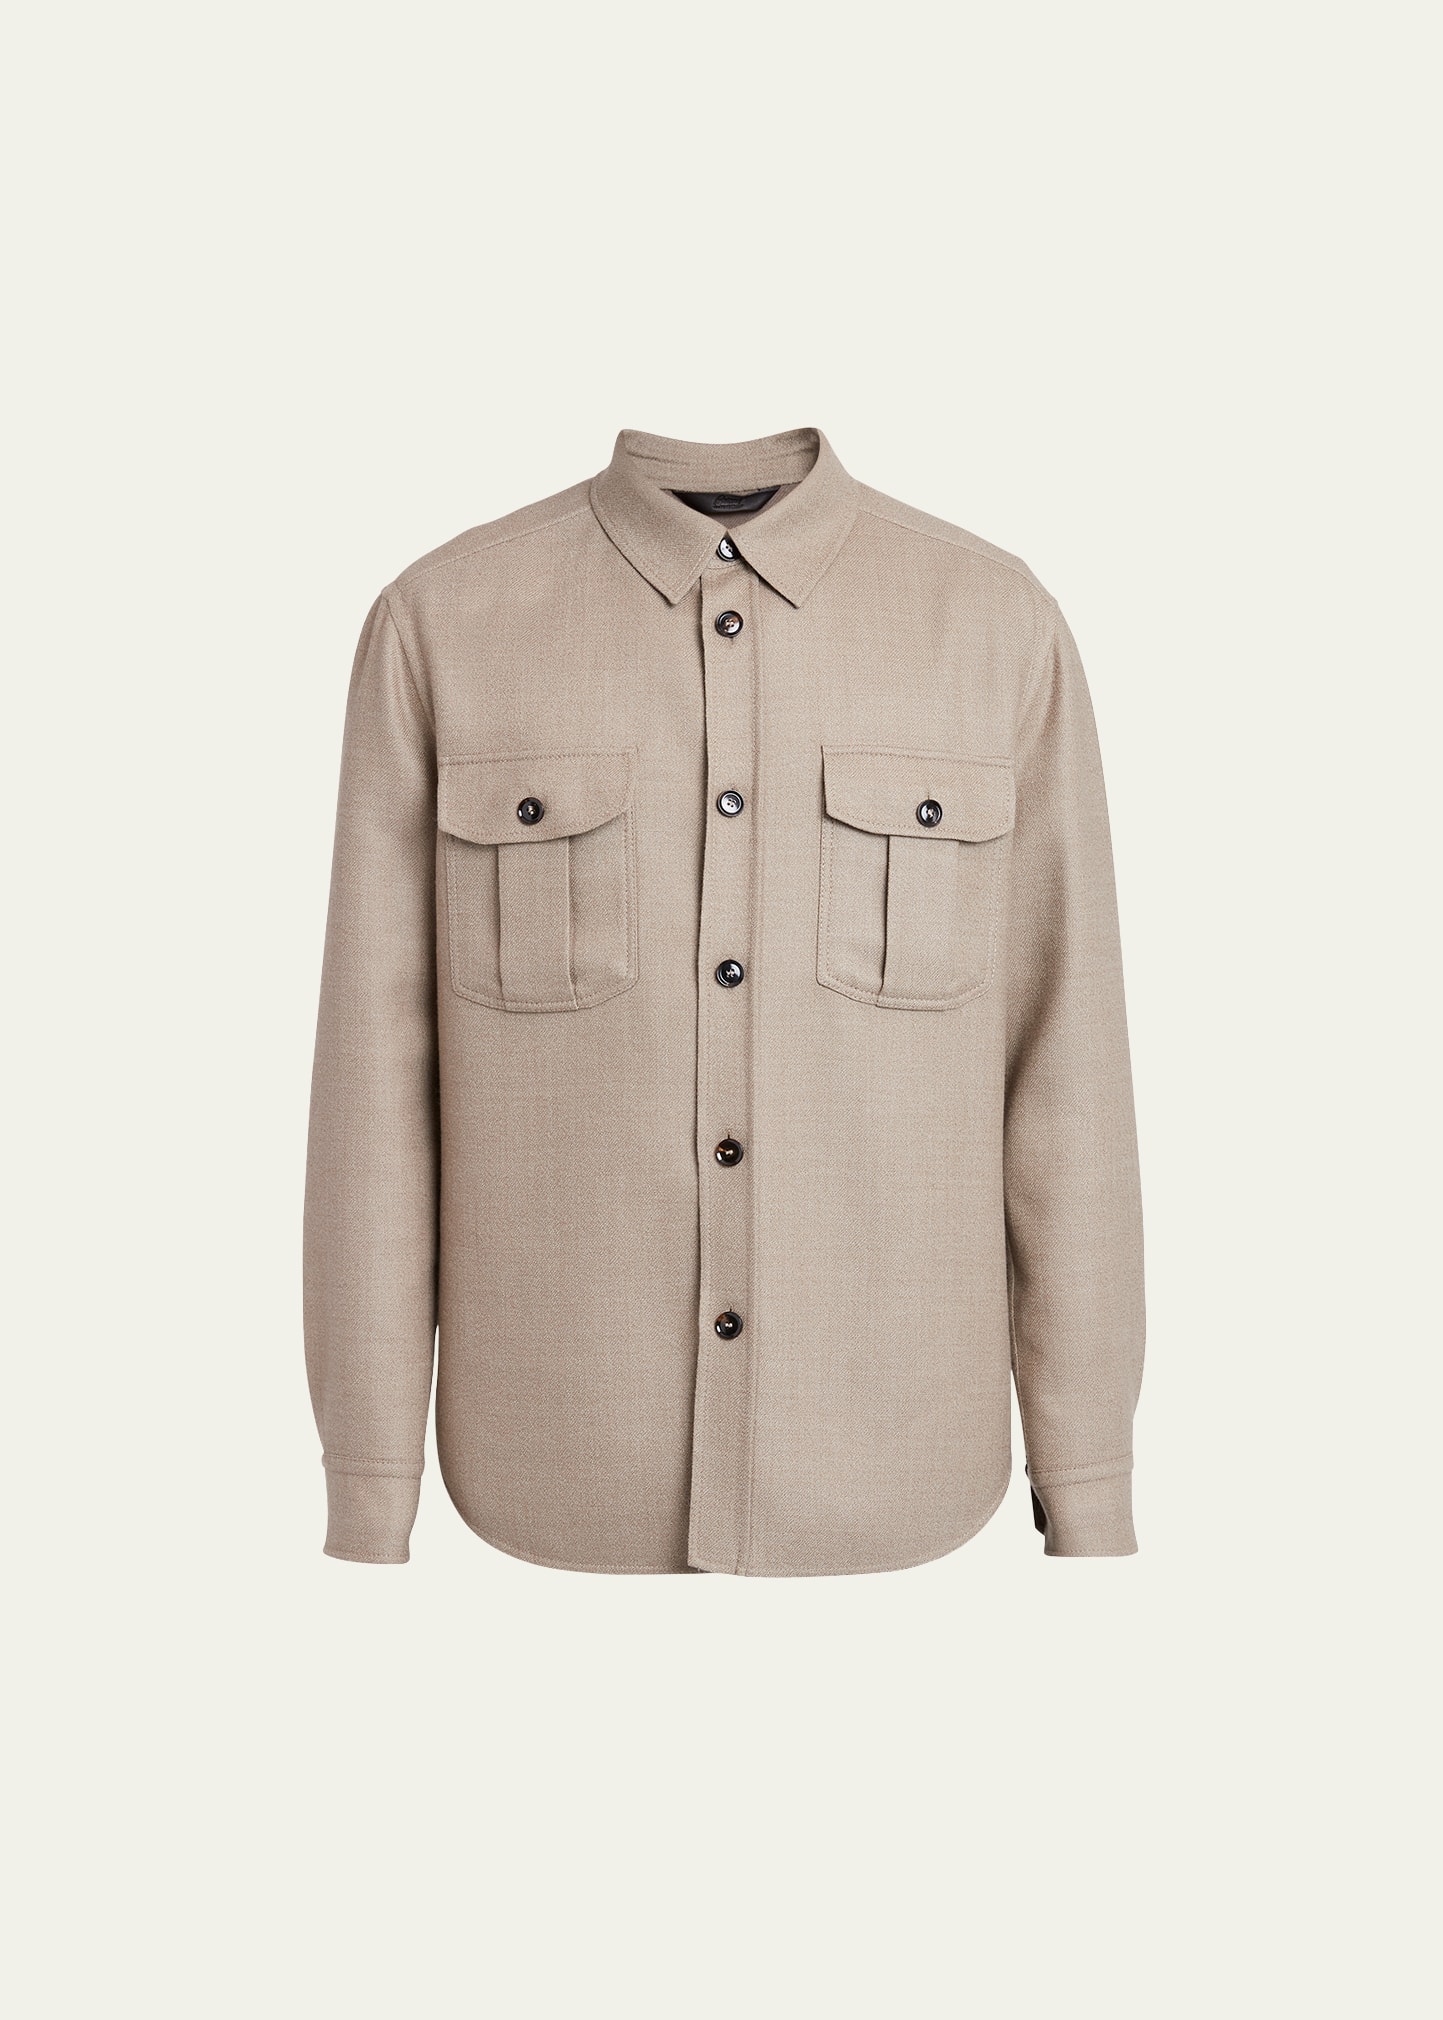 Brioni Men's Stretch Wool Overshirt In Sand